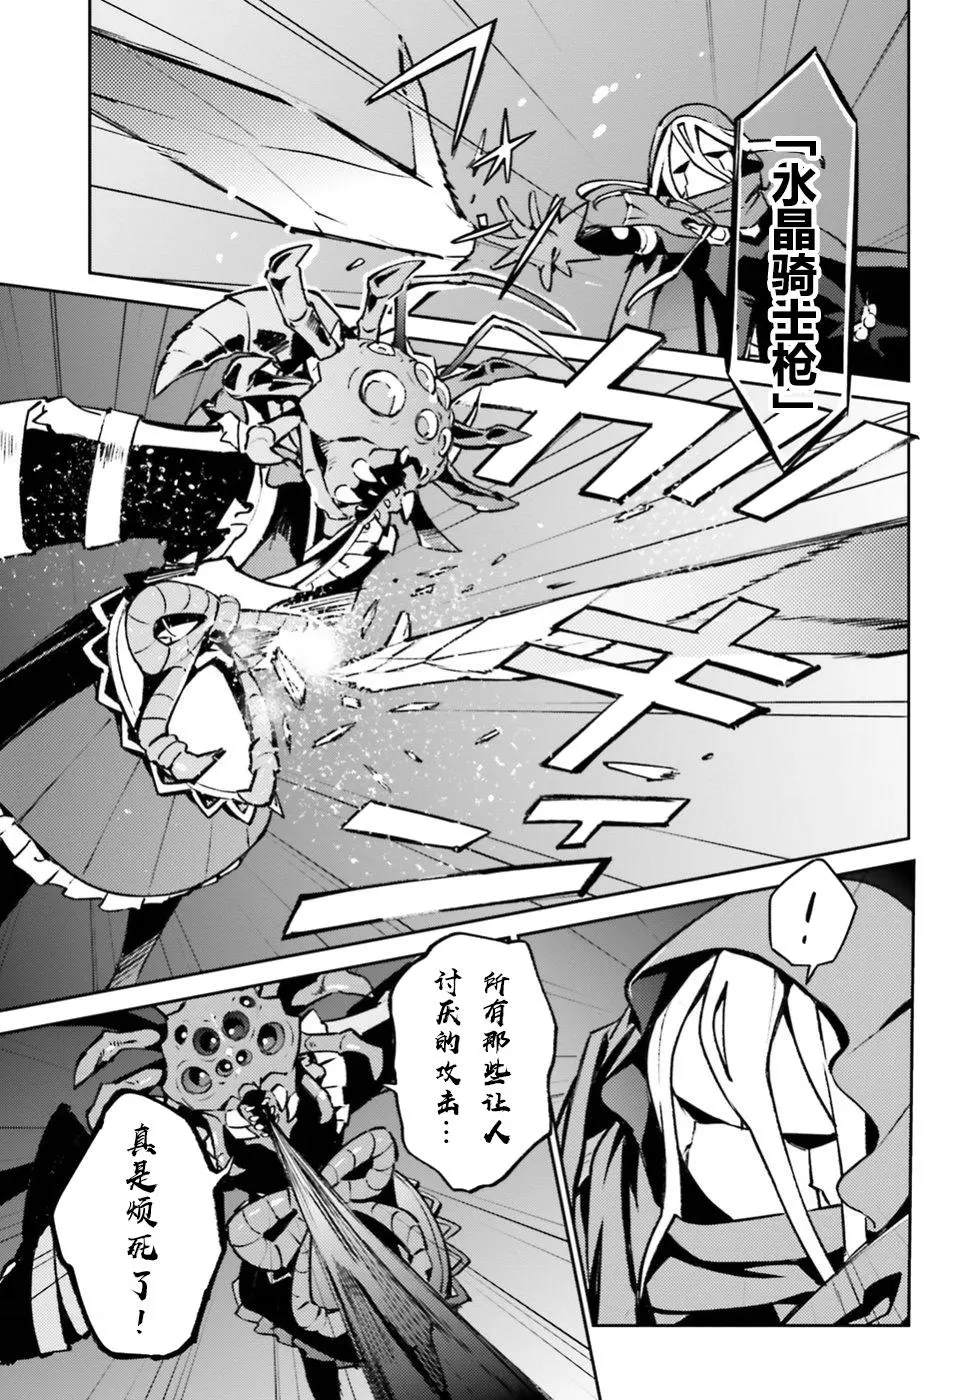 OVERLORD - 第46話 - 1